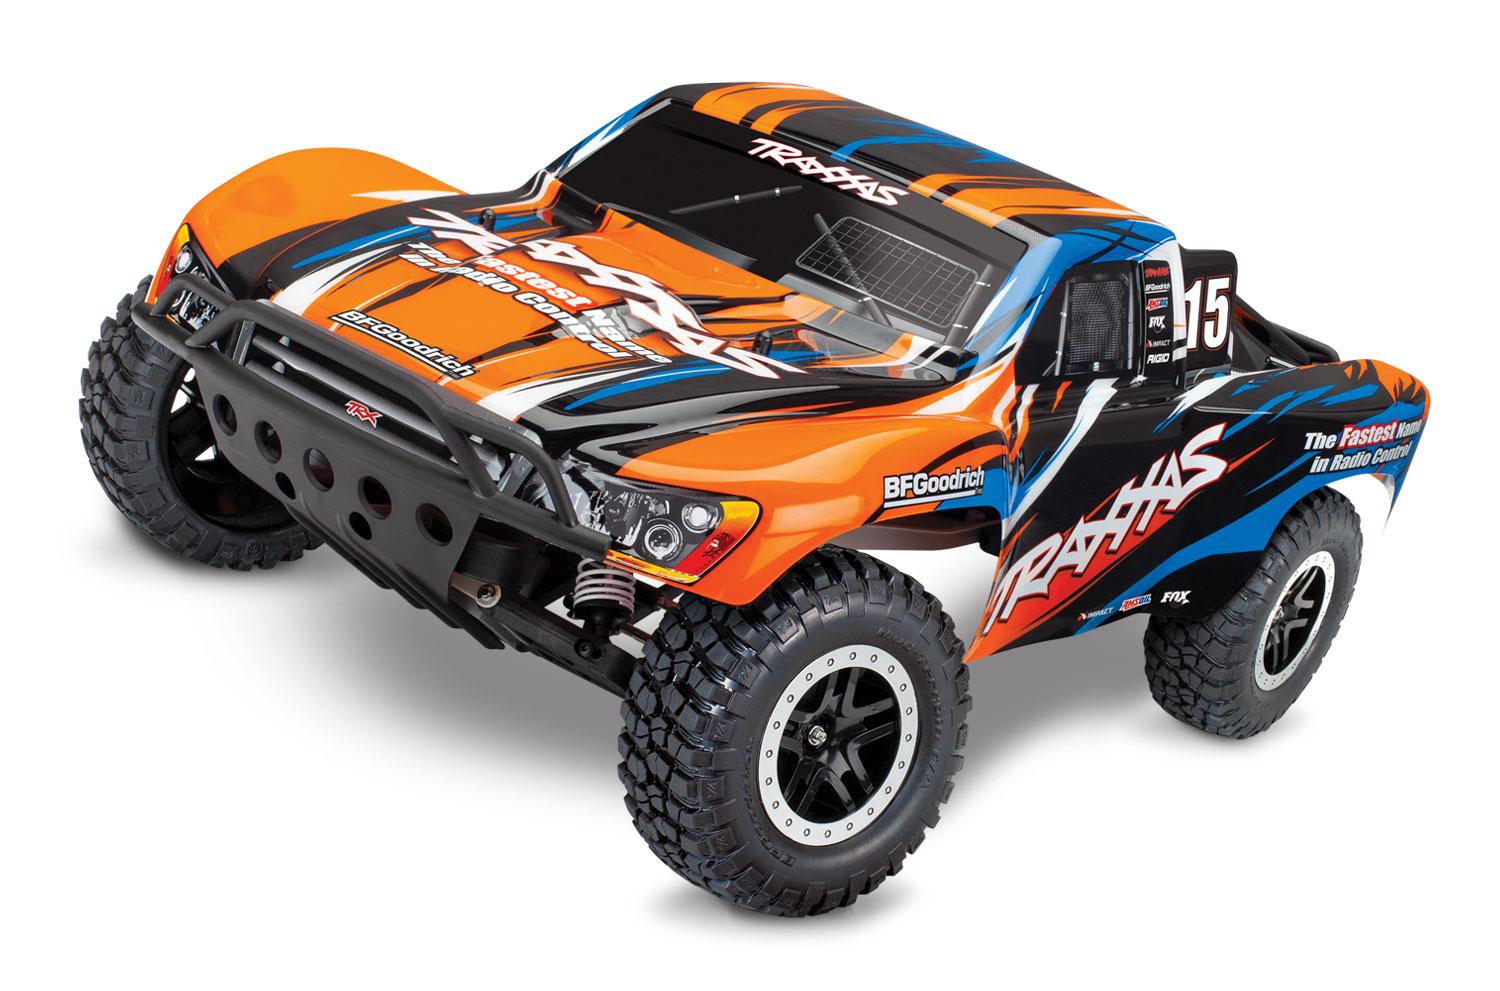 Super Fast Rc Cars Under $100: Top Affordable Picks: Fast RC Cars Under $100